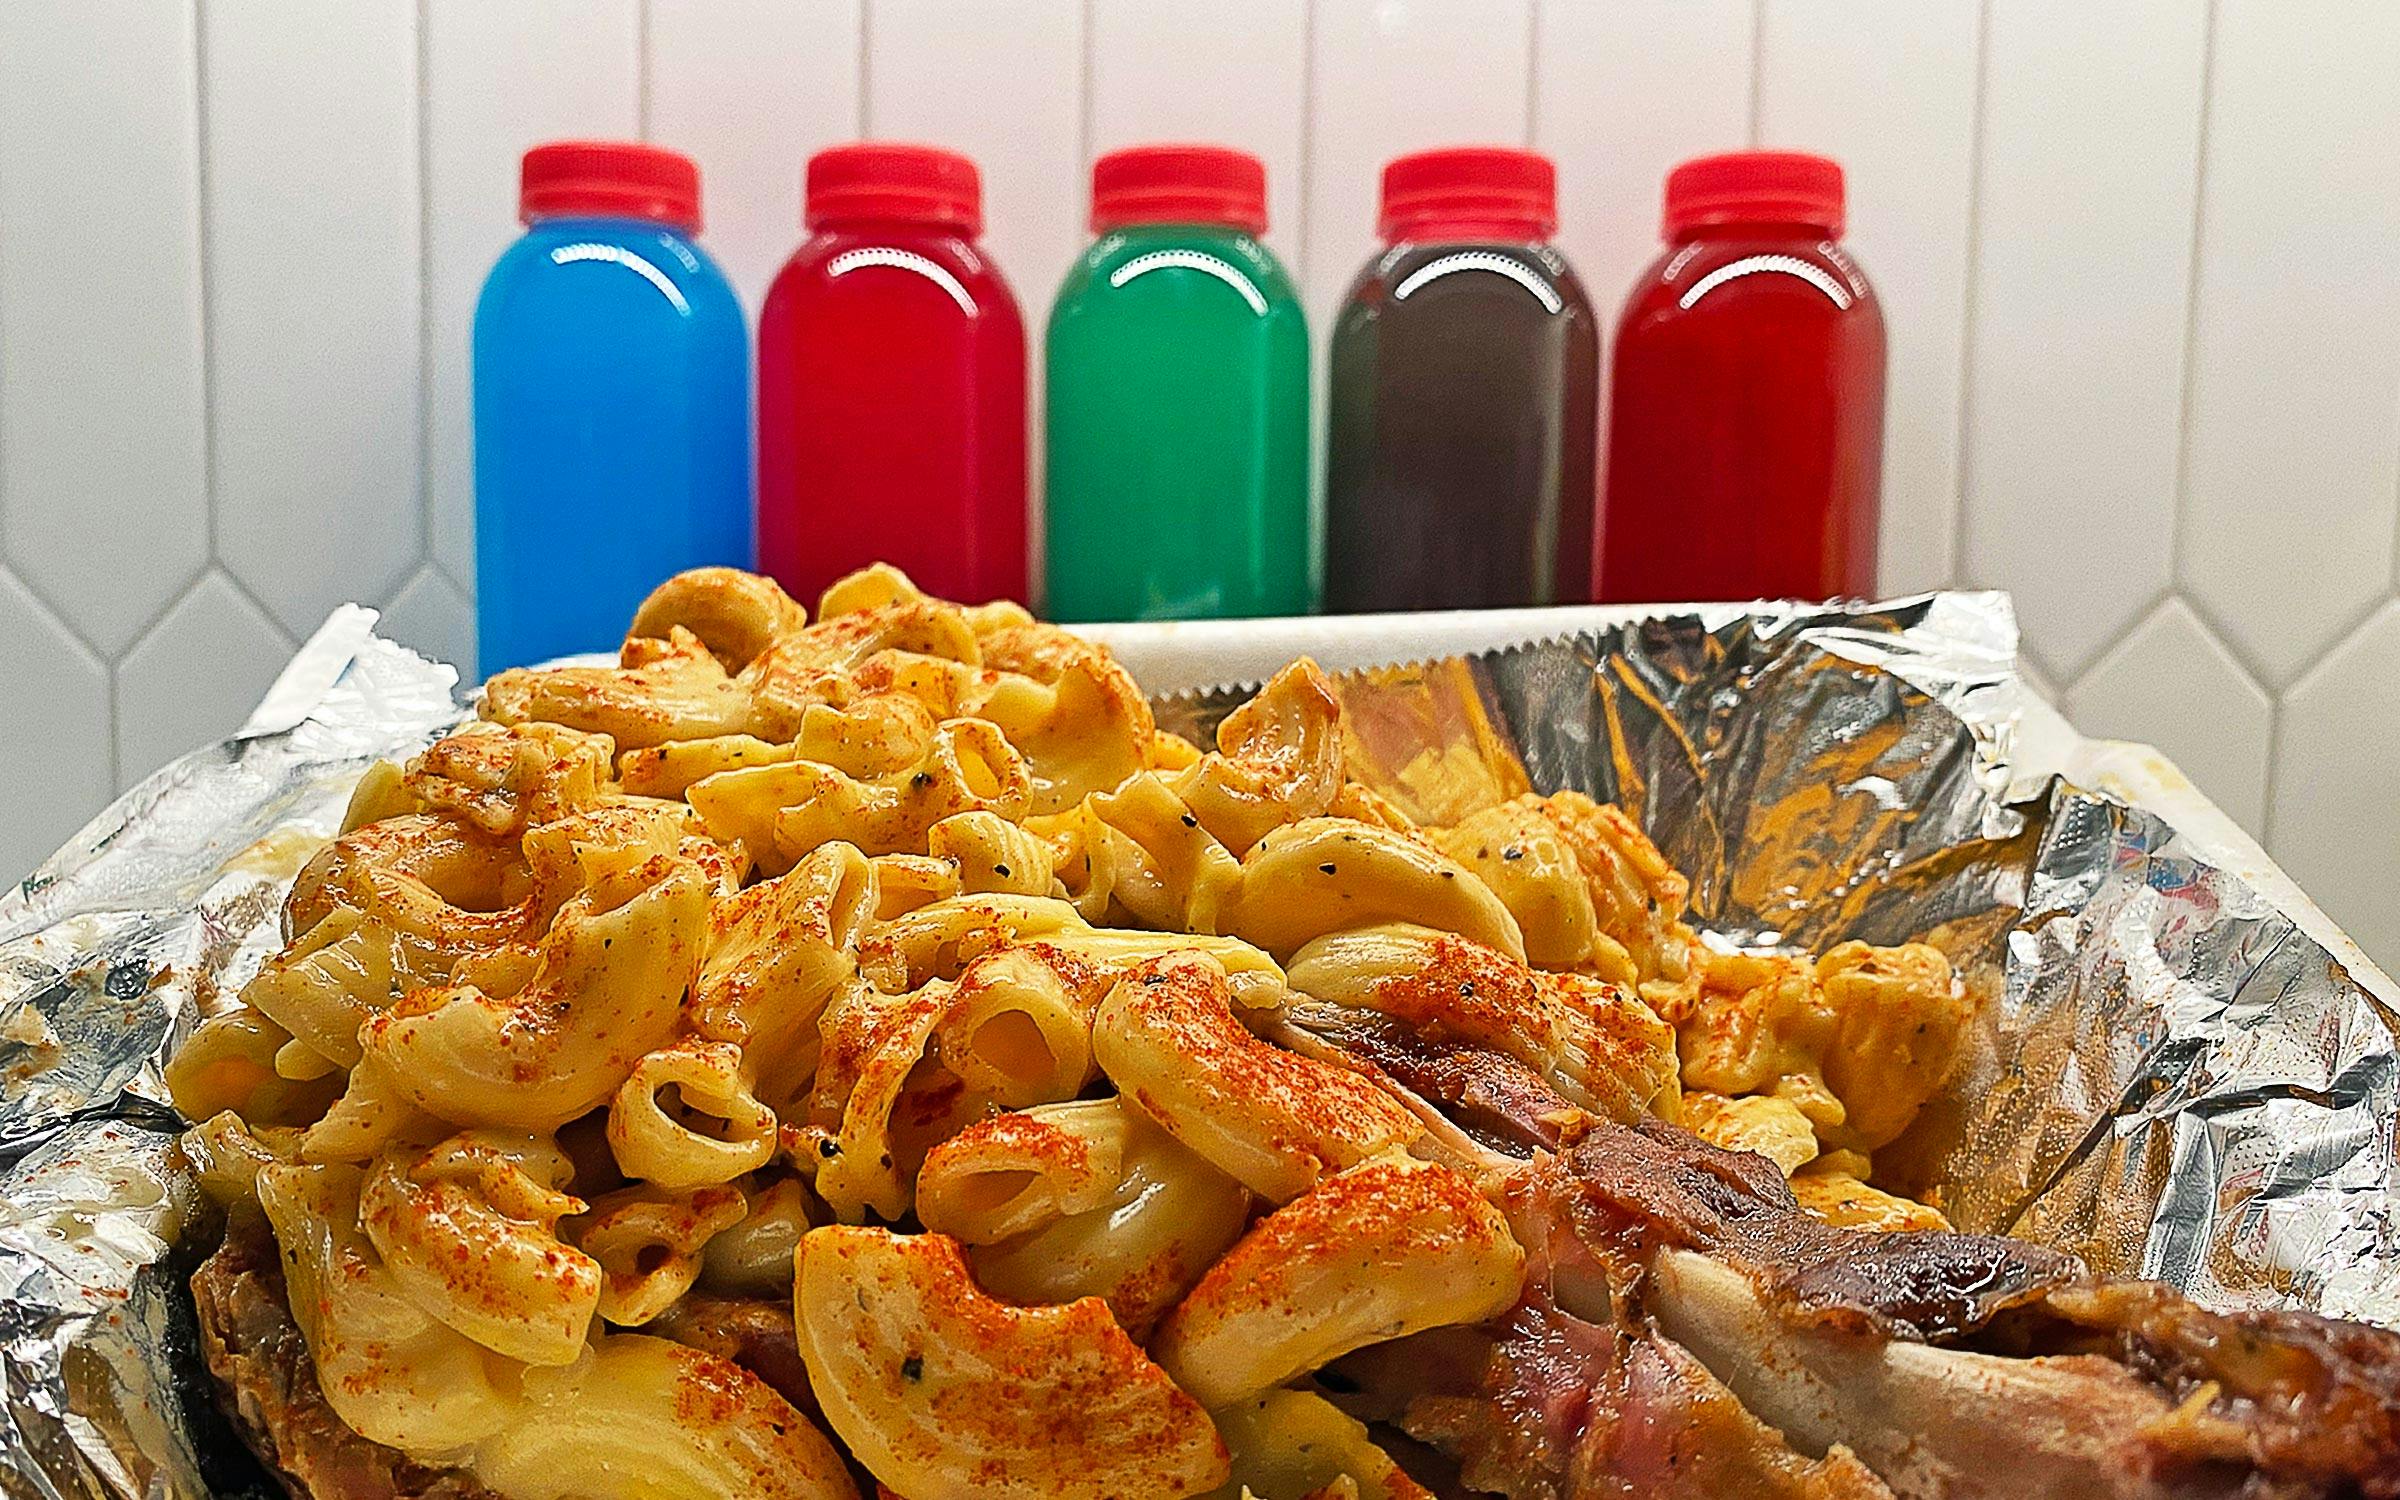 Seasoned mac and cheese and turkey in front of colorful bottled drinks. 